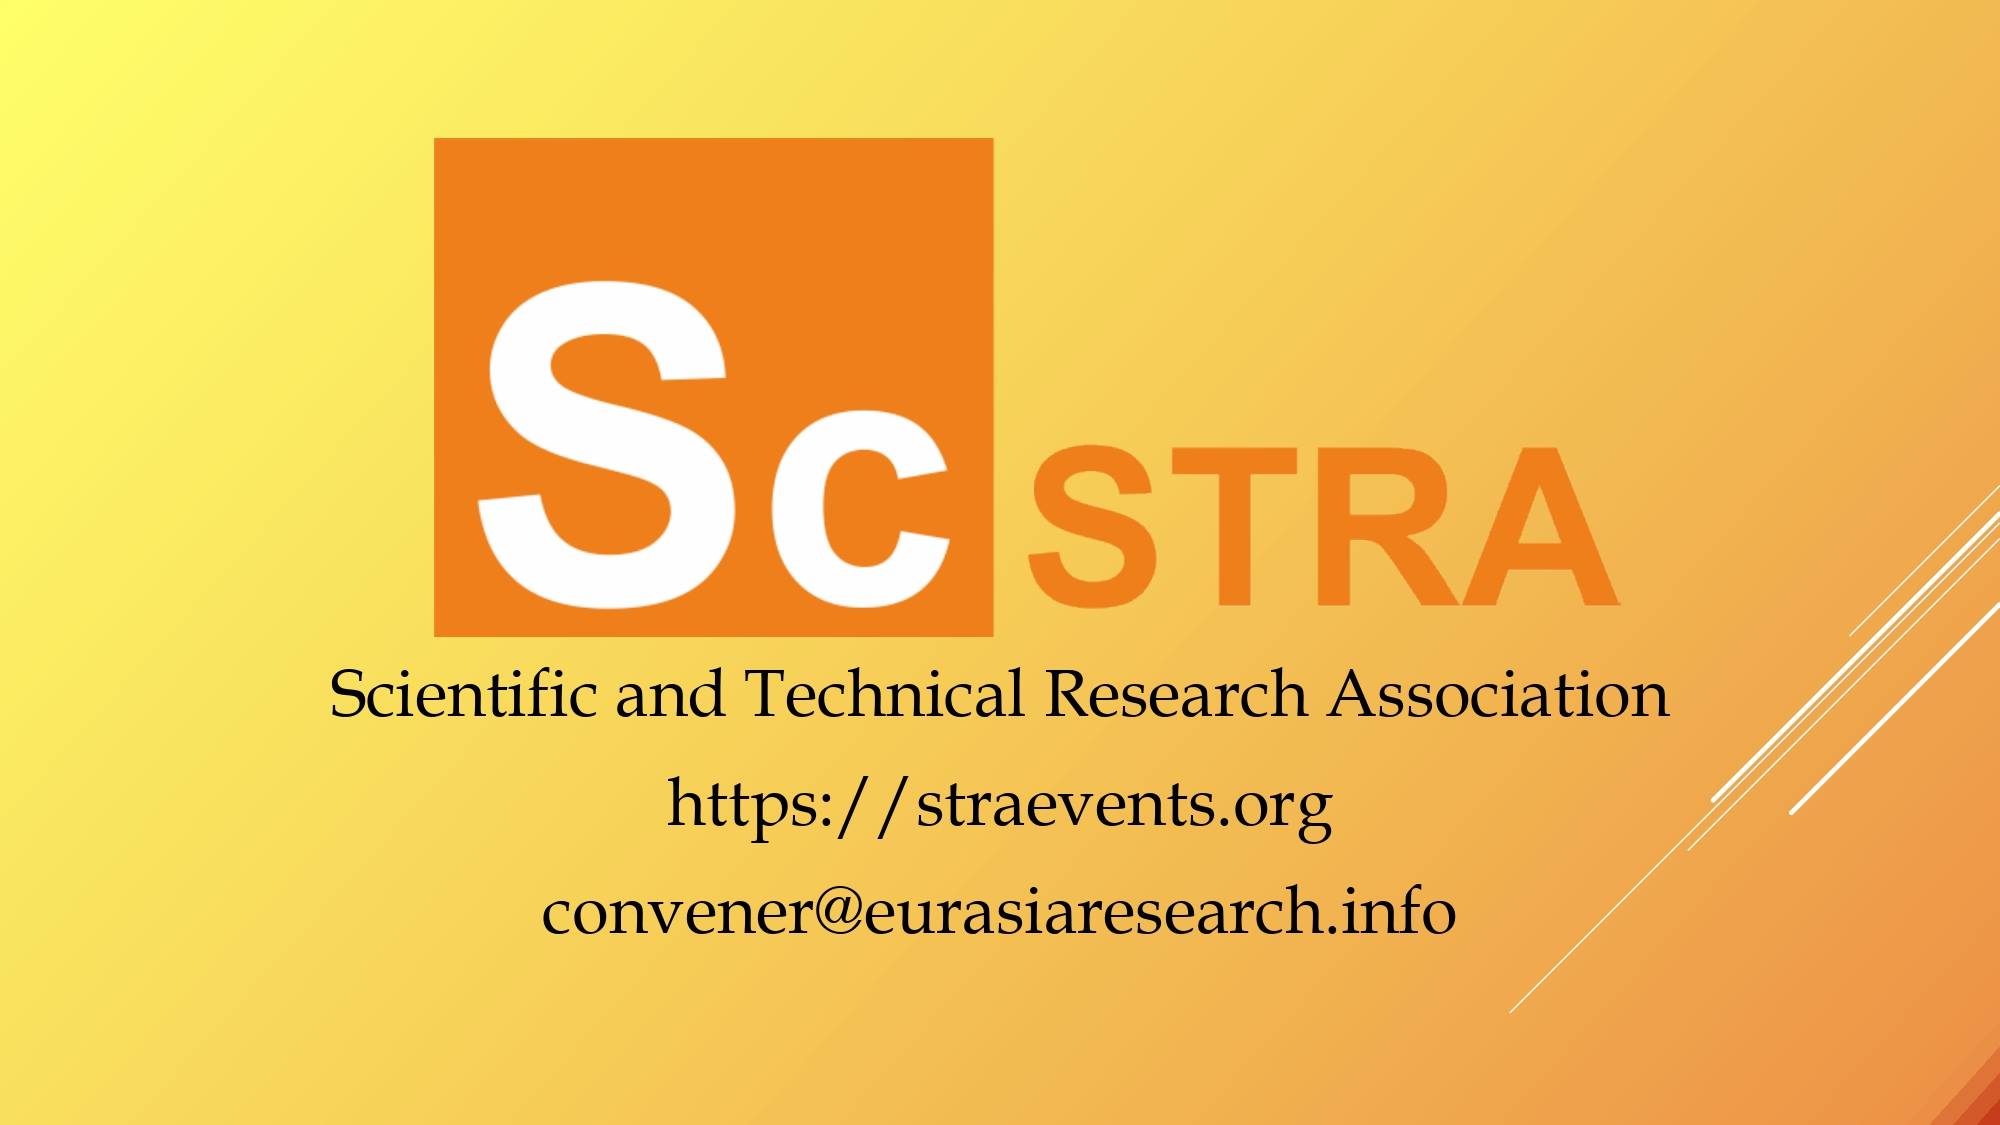 2nd ICSTR Berlin – International Conference on Science & Technology Research, 14-15 May 2021, Berlin, Germany